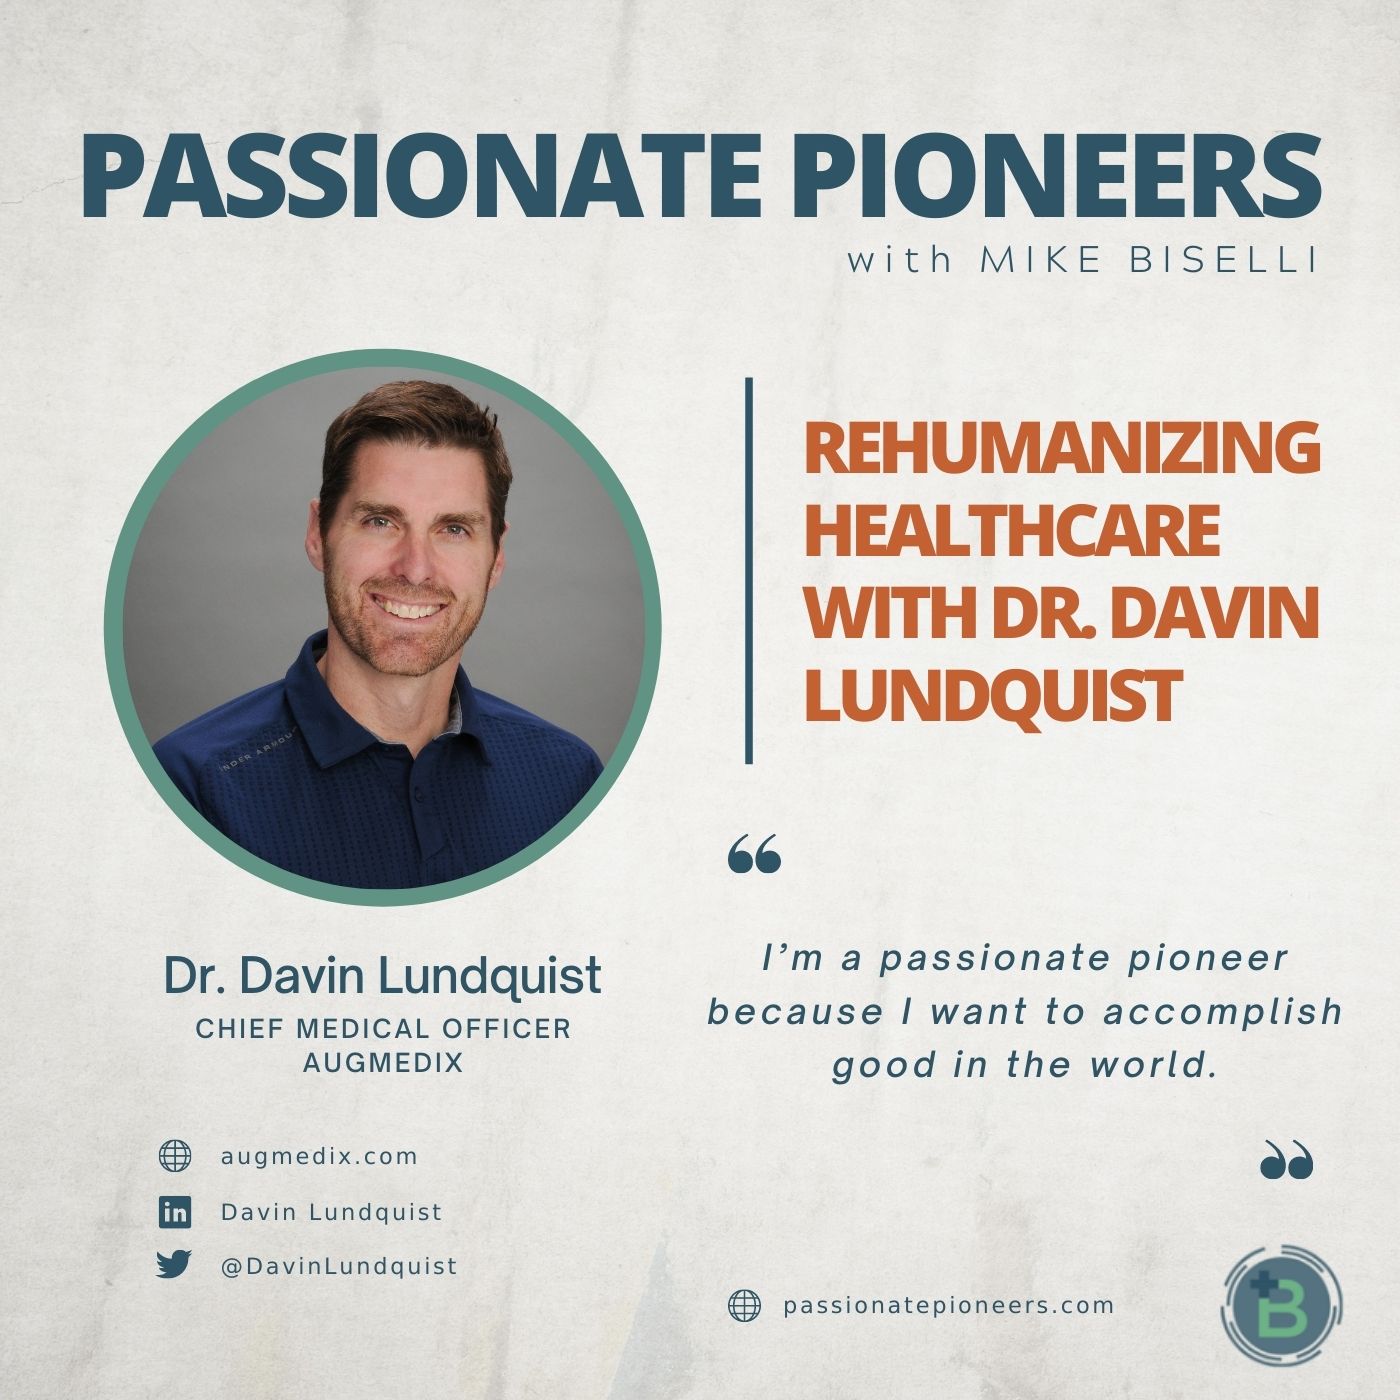 Rehumanizing Healthcare with Dr. Davin Lundquist